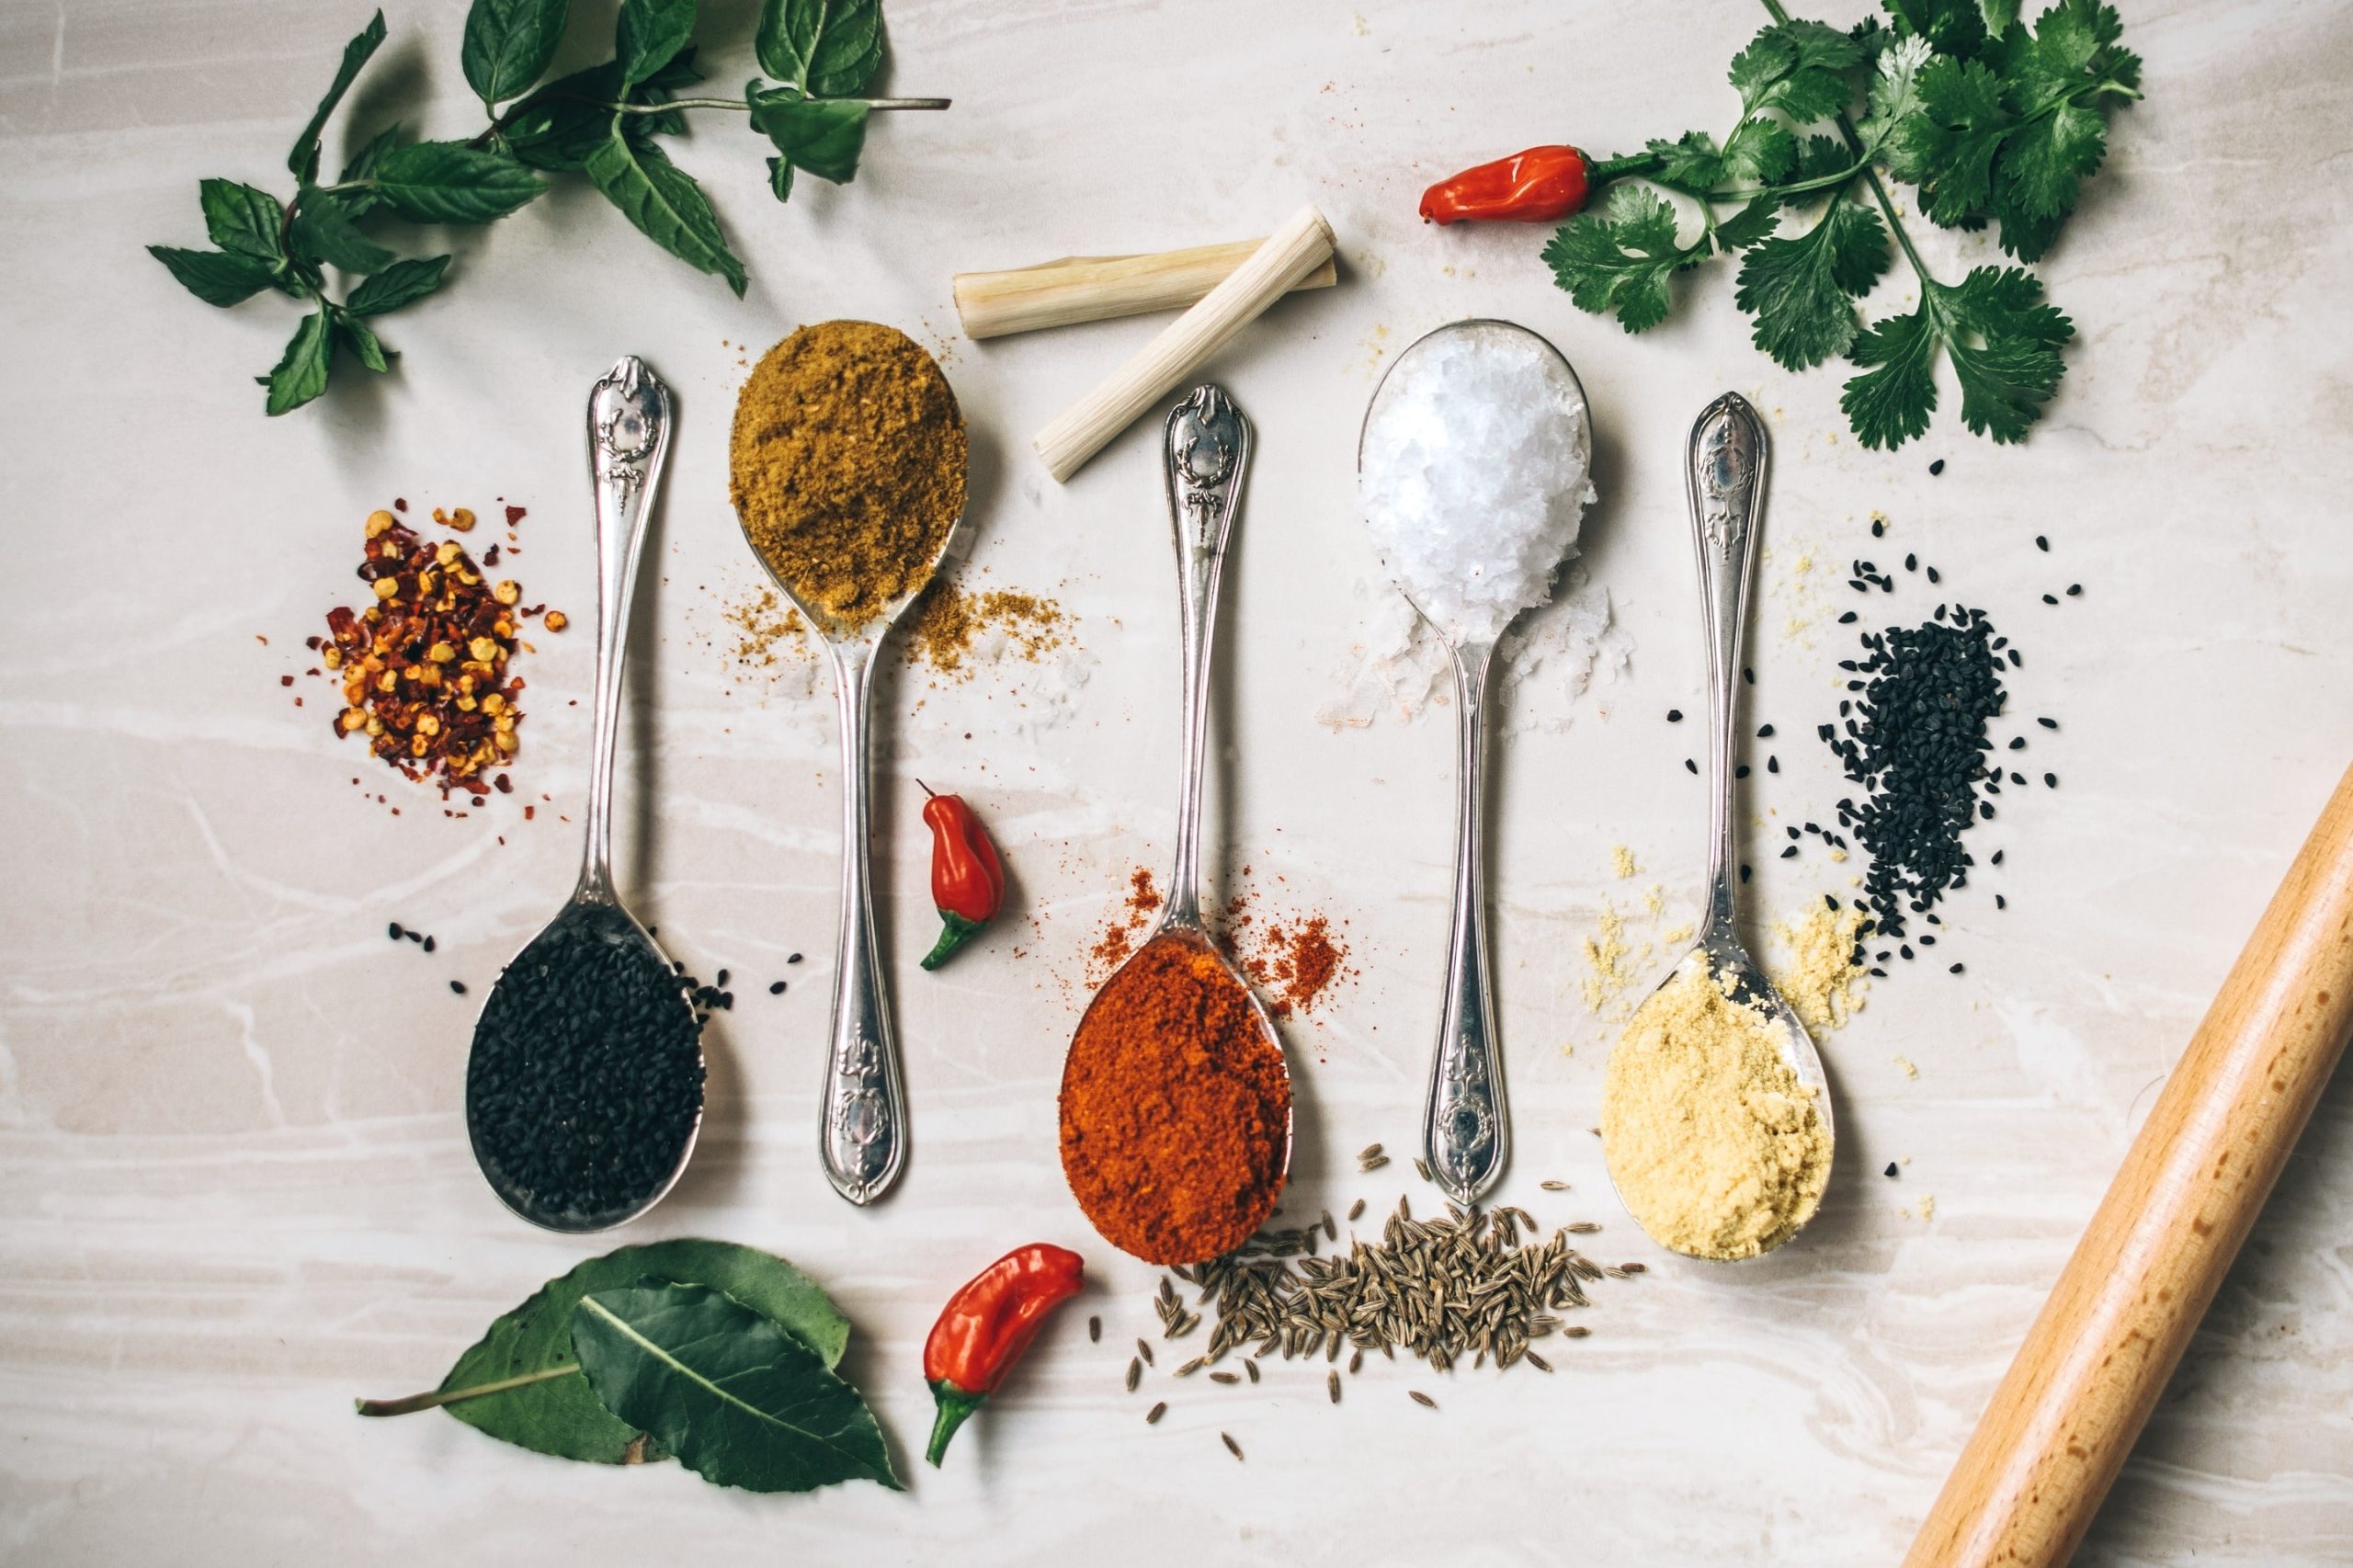 seasonings and spices in spoons